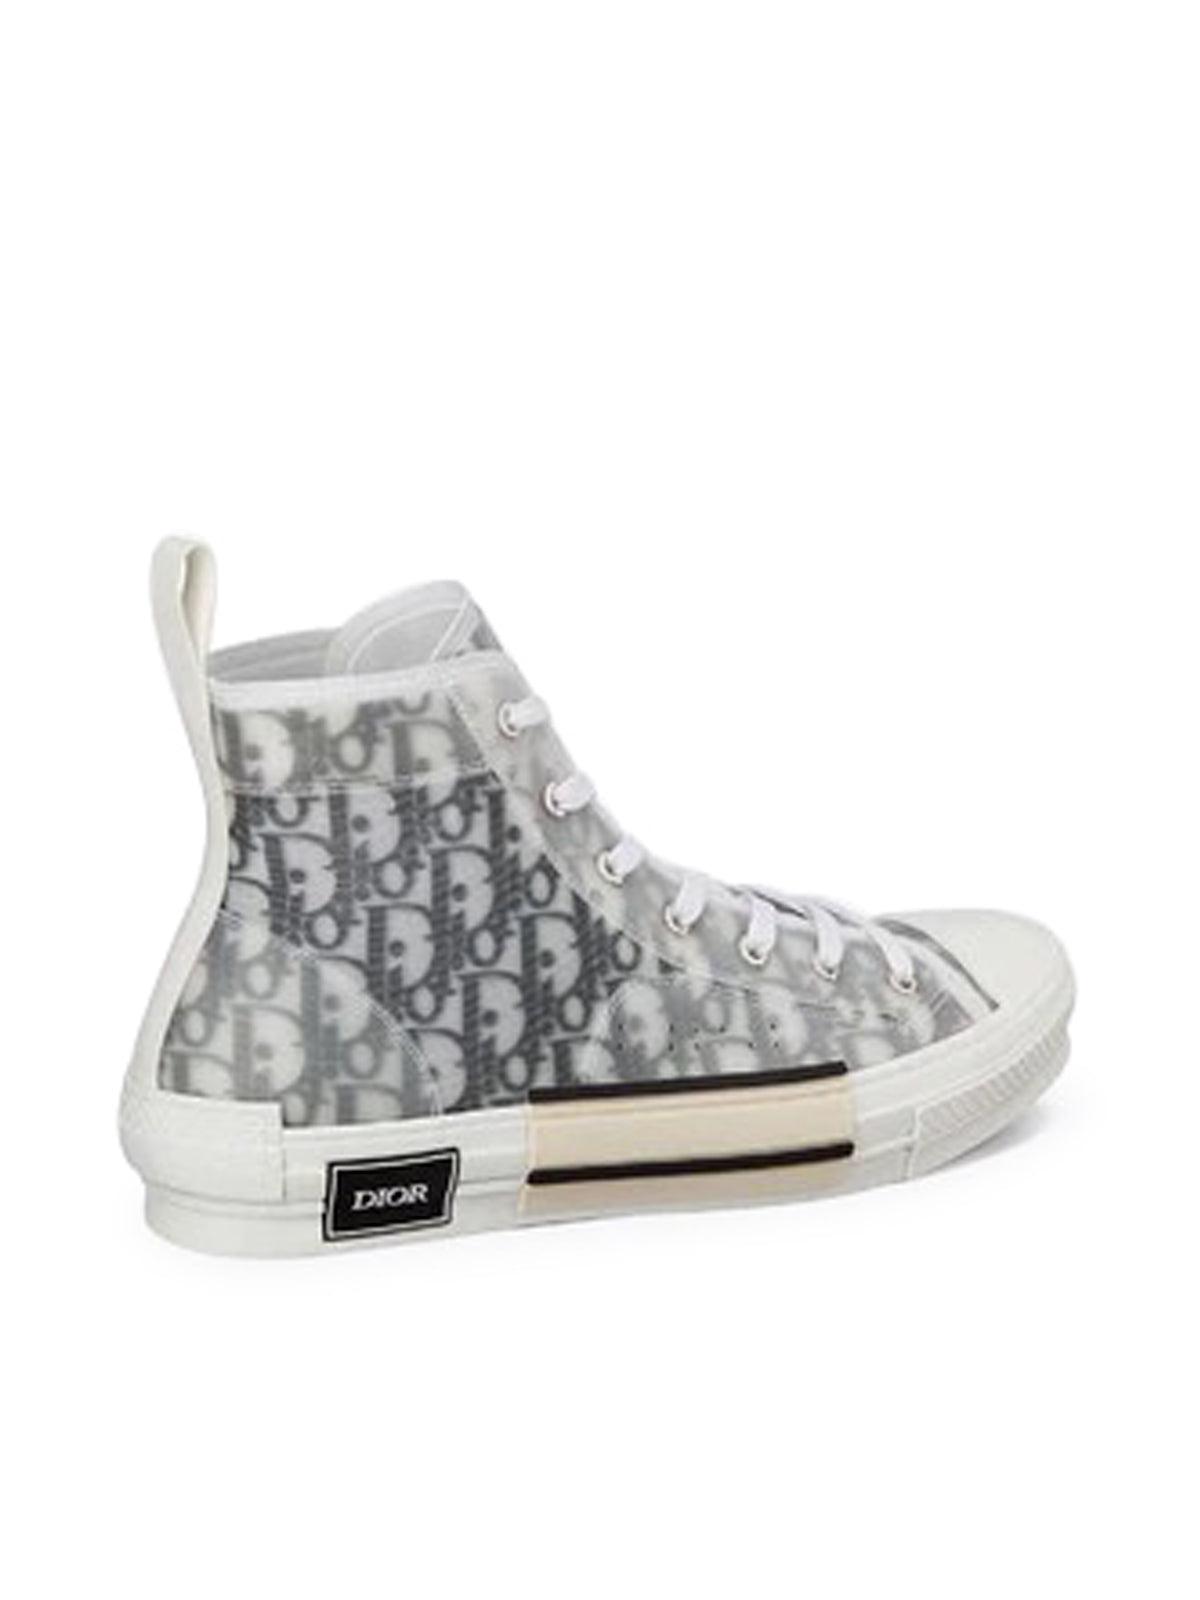 Dior B23 High-top Sneakers In Dior Oblique for Men | Lyst